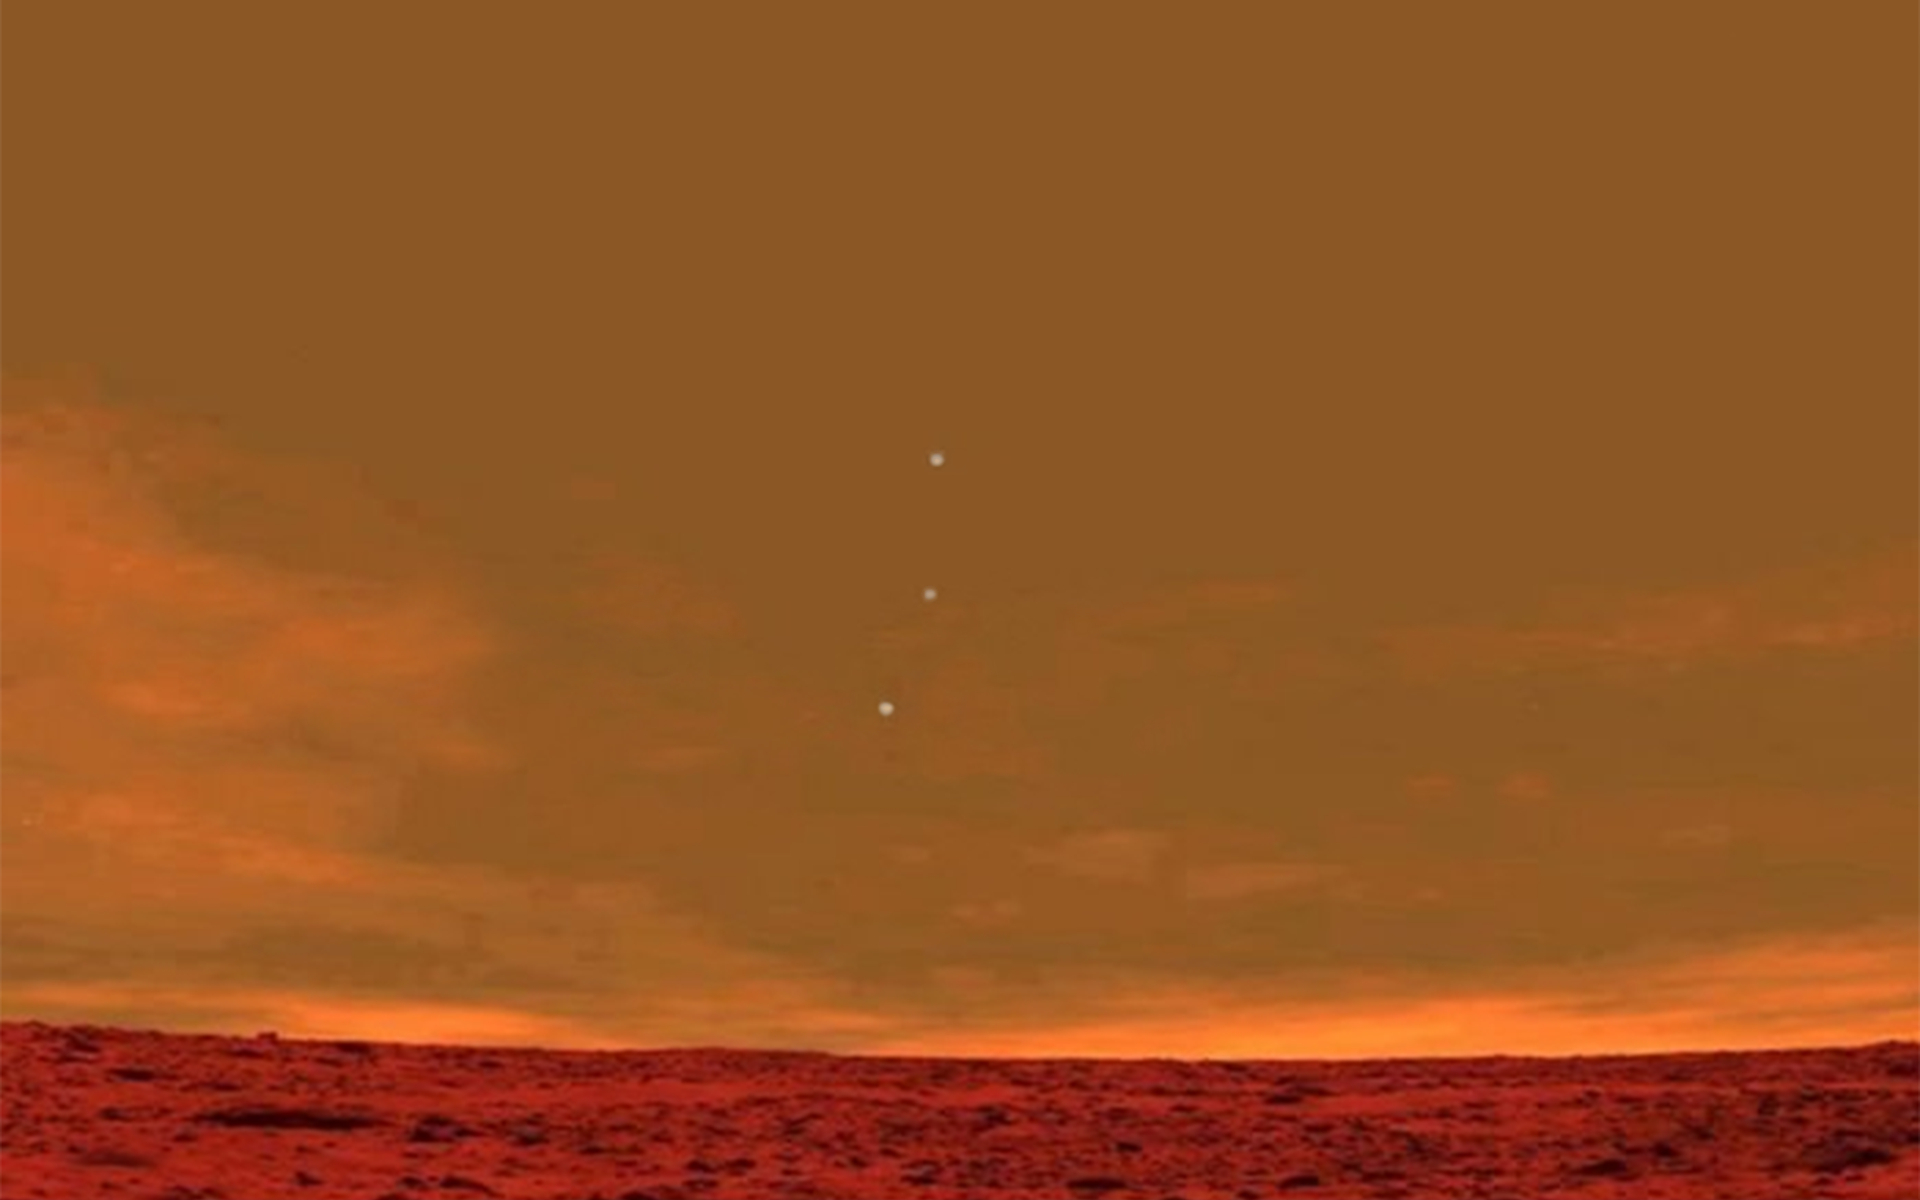 Earth, Mercury, and Venus from Mars-As cool as it would be this photo was generated from a piece of planetarium software.